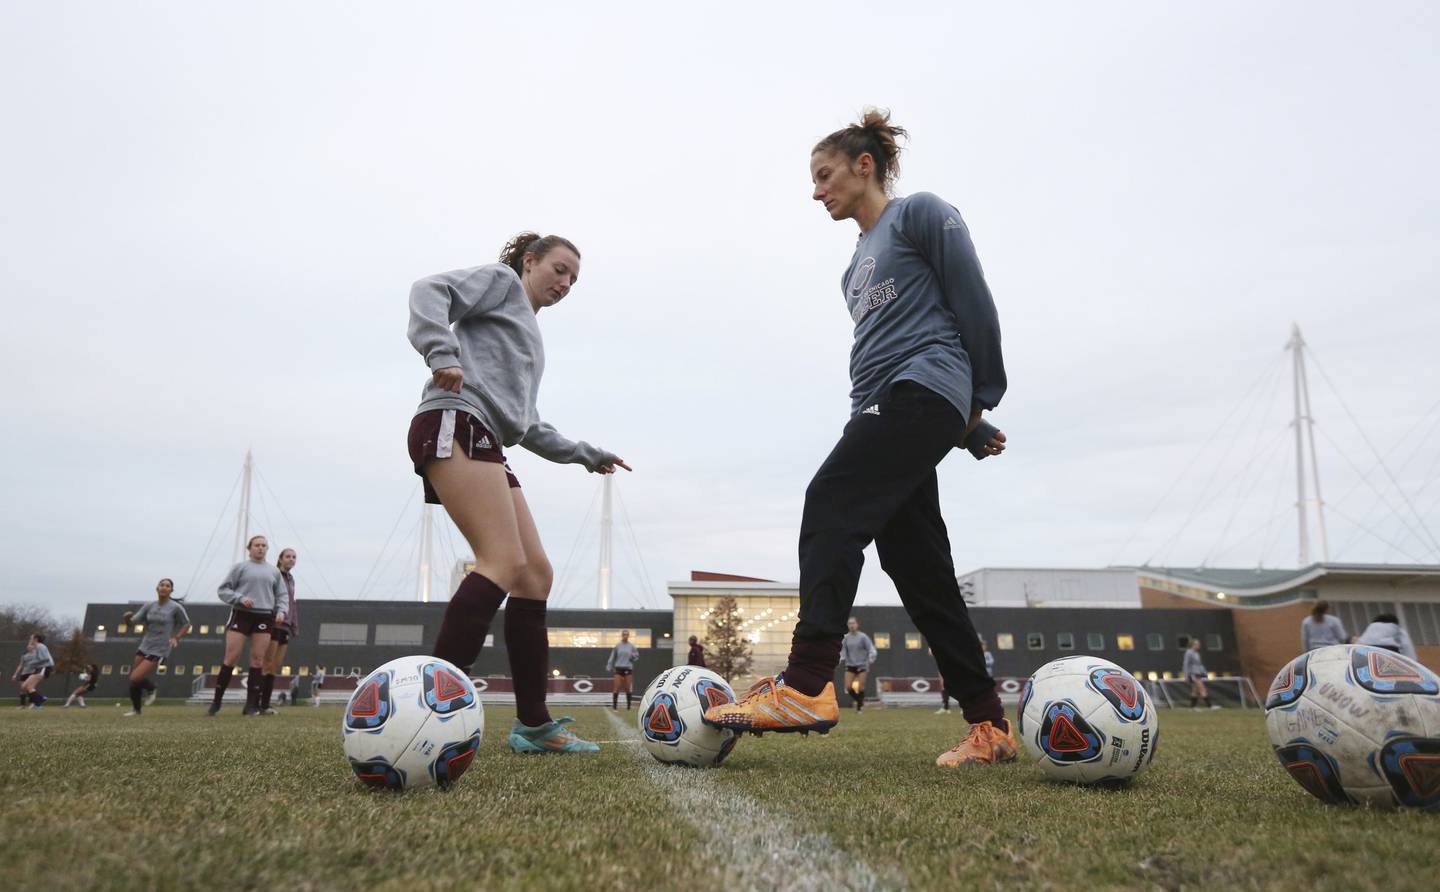 Julianne Sitch, right, dribbles the ball while working with the University of Chicago women's soccer team during practice in Chicago on Tuesday Nov. 28, 2017.